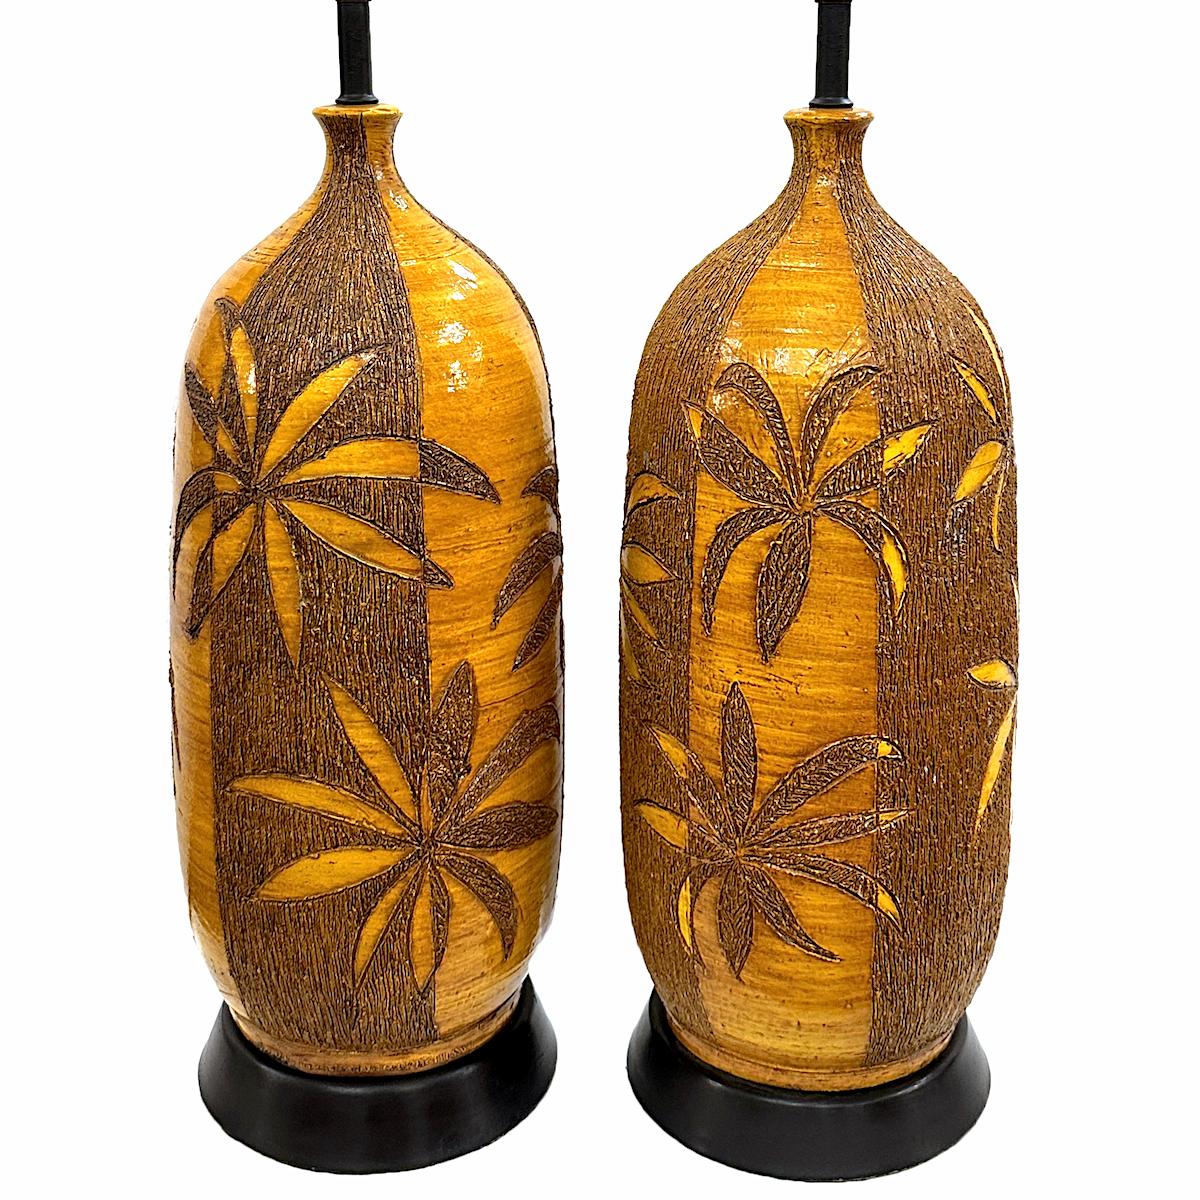 Pair of circa 1960's Italian ceramic lamps with palm tree decoration.

Measurements:
Height of body: 21